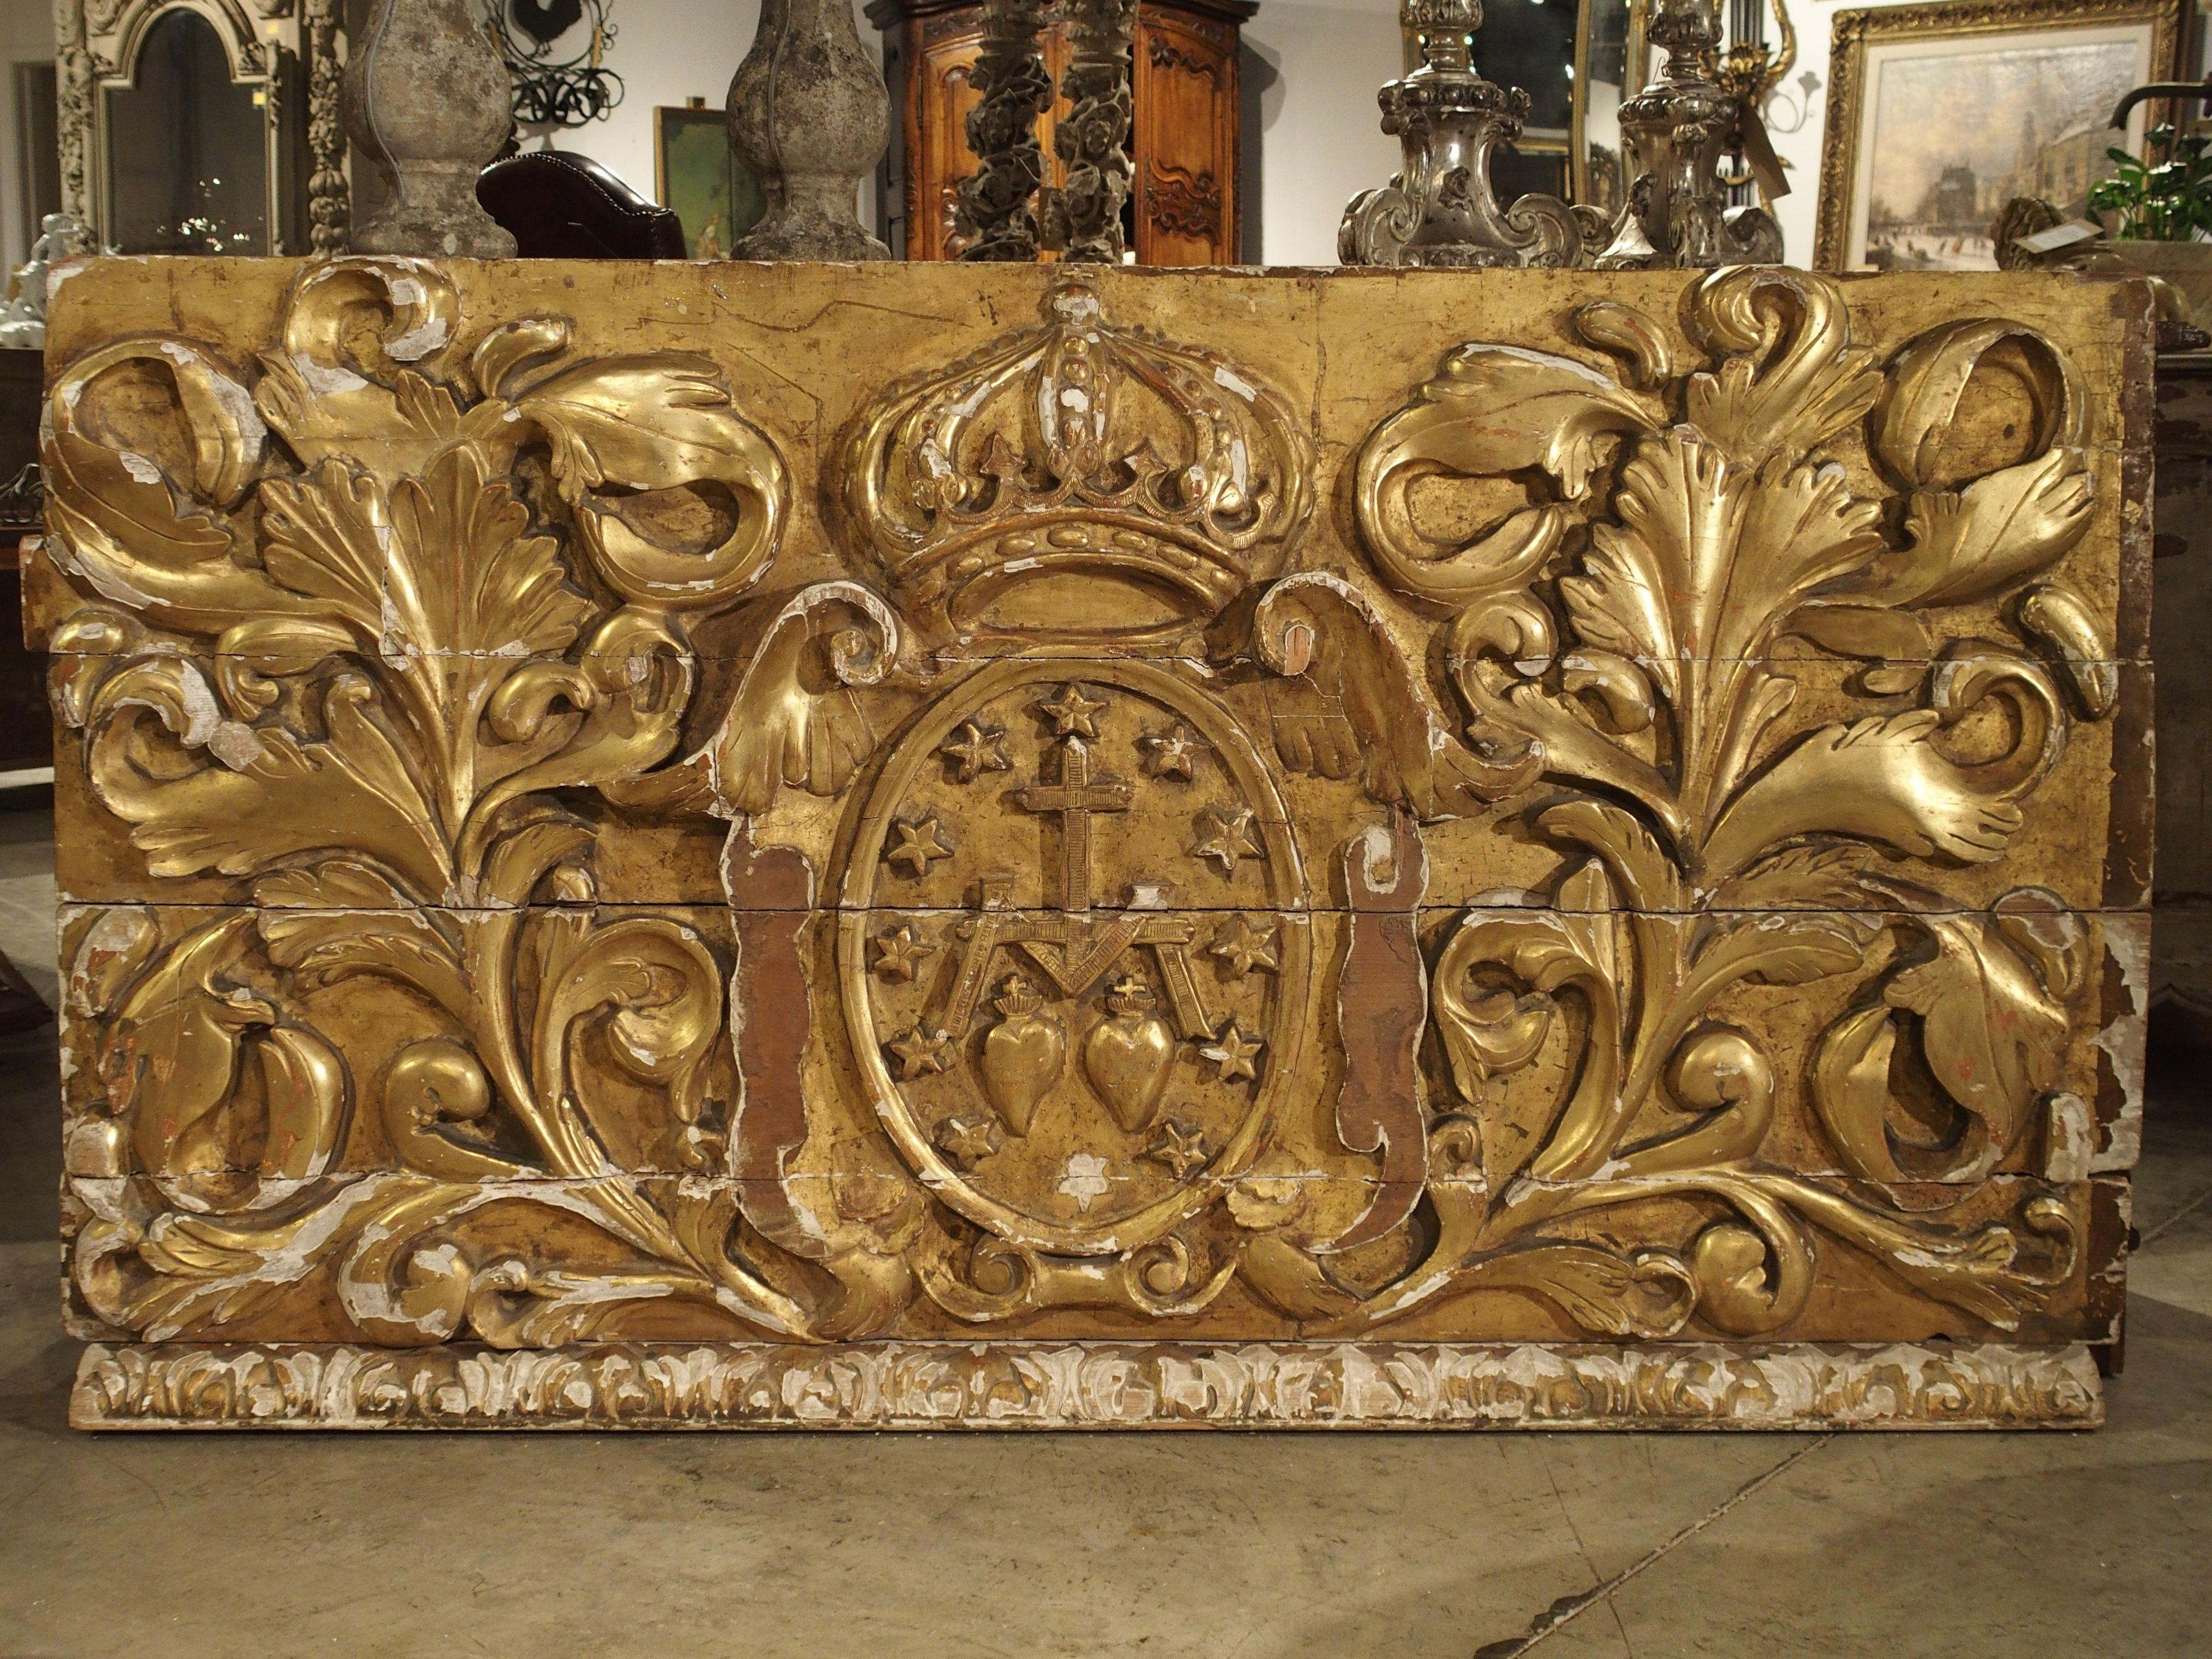 From Spain, this magnificent parcel-gilt panel overdoor dates to the middle of the 19th century. On either side of the central medallion are two large foliate carvings. The top is a crown upheld by two wings on either side of the escutcheon. The